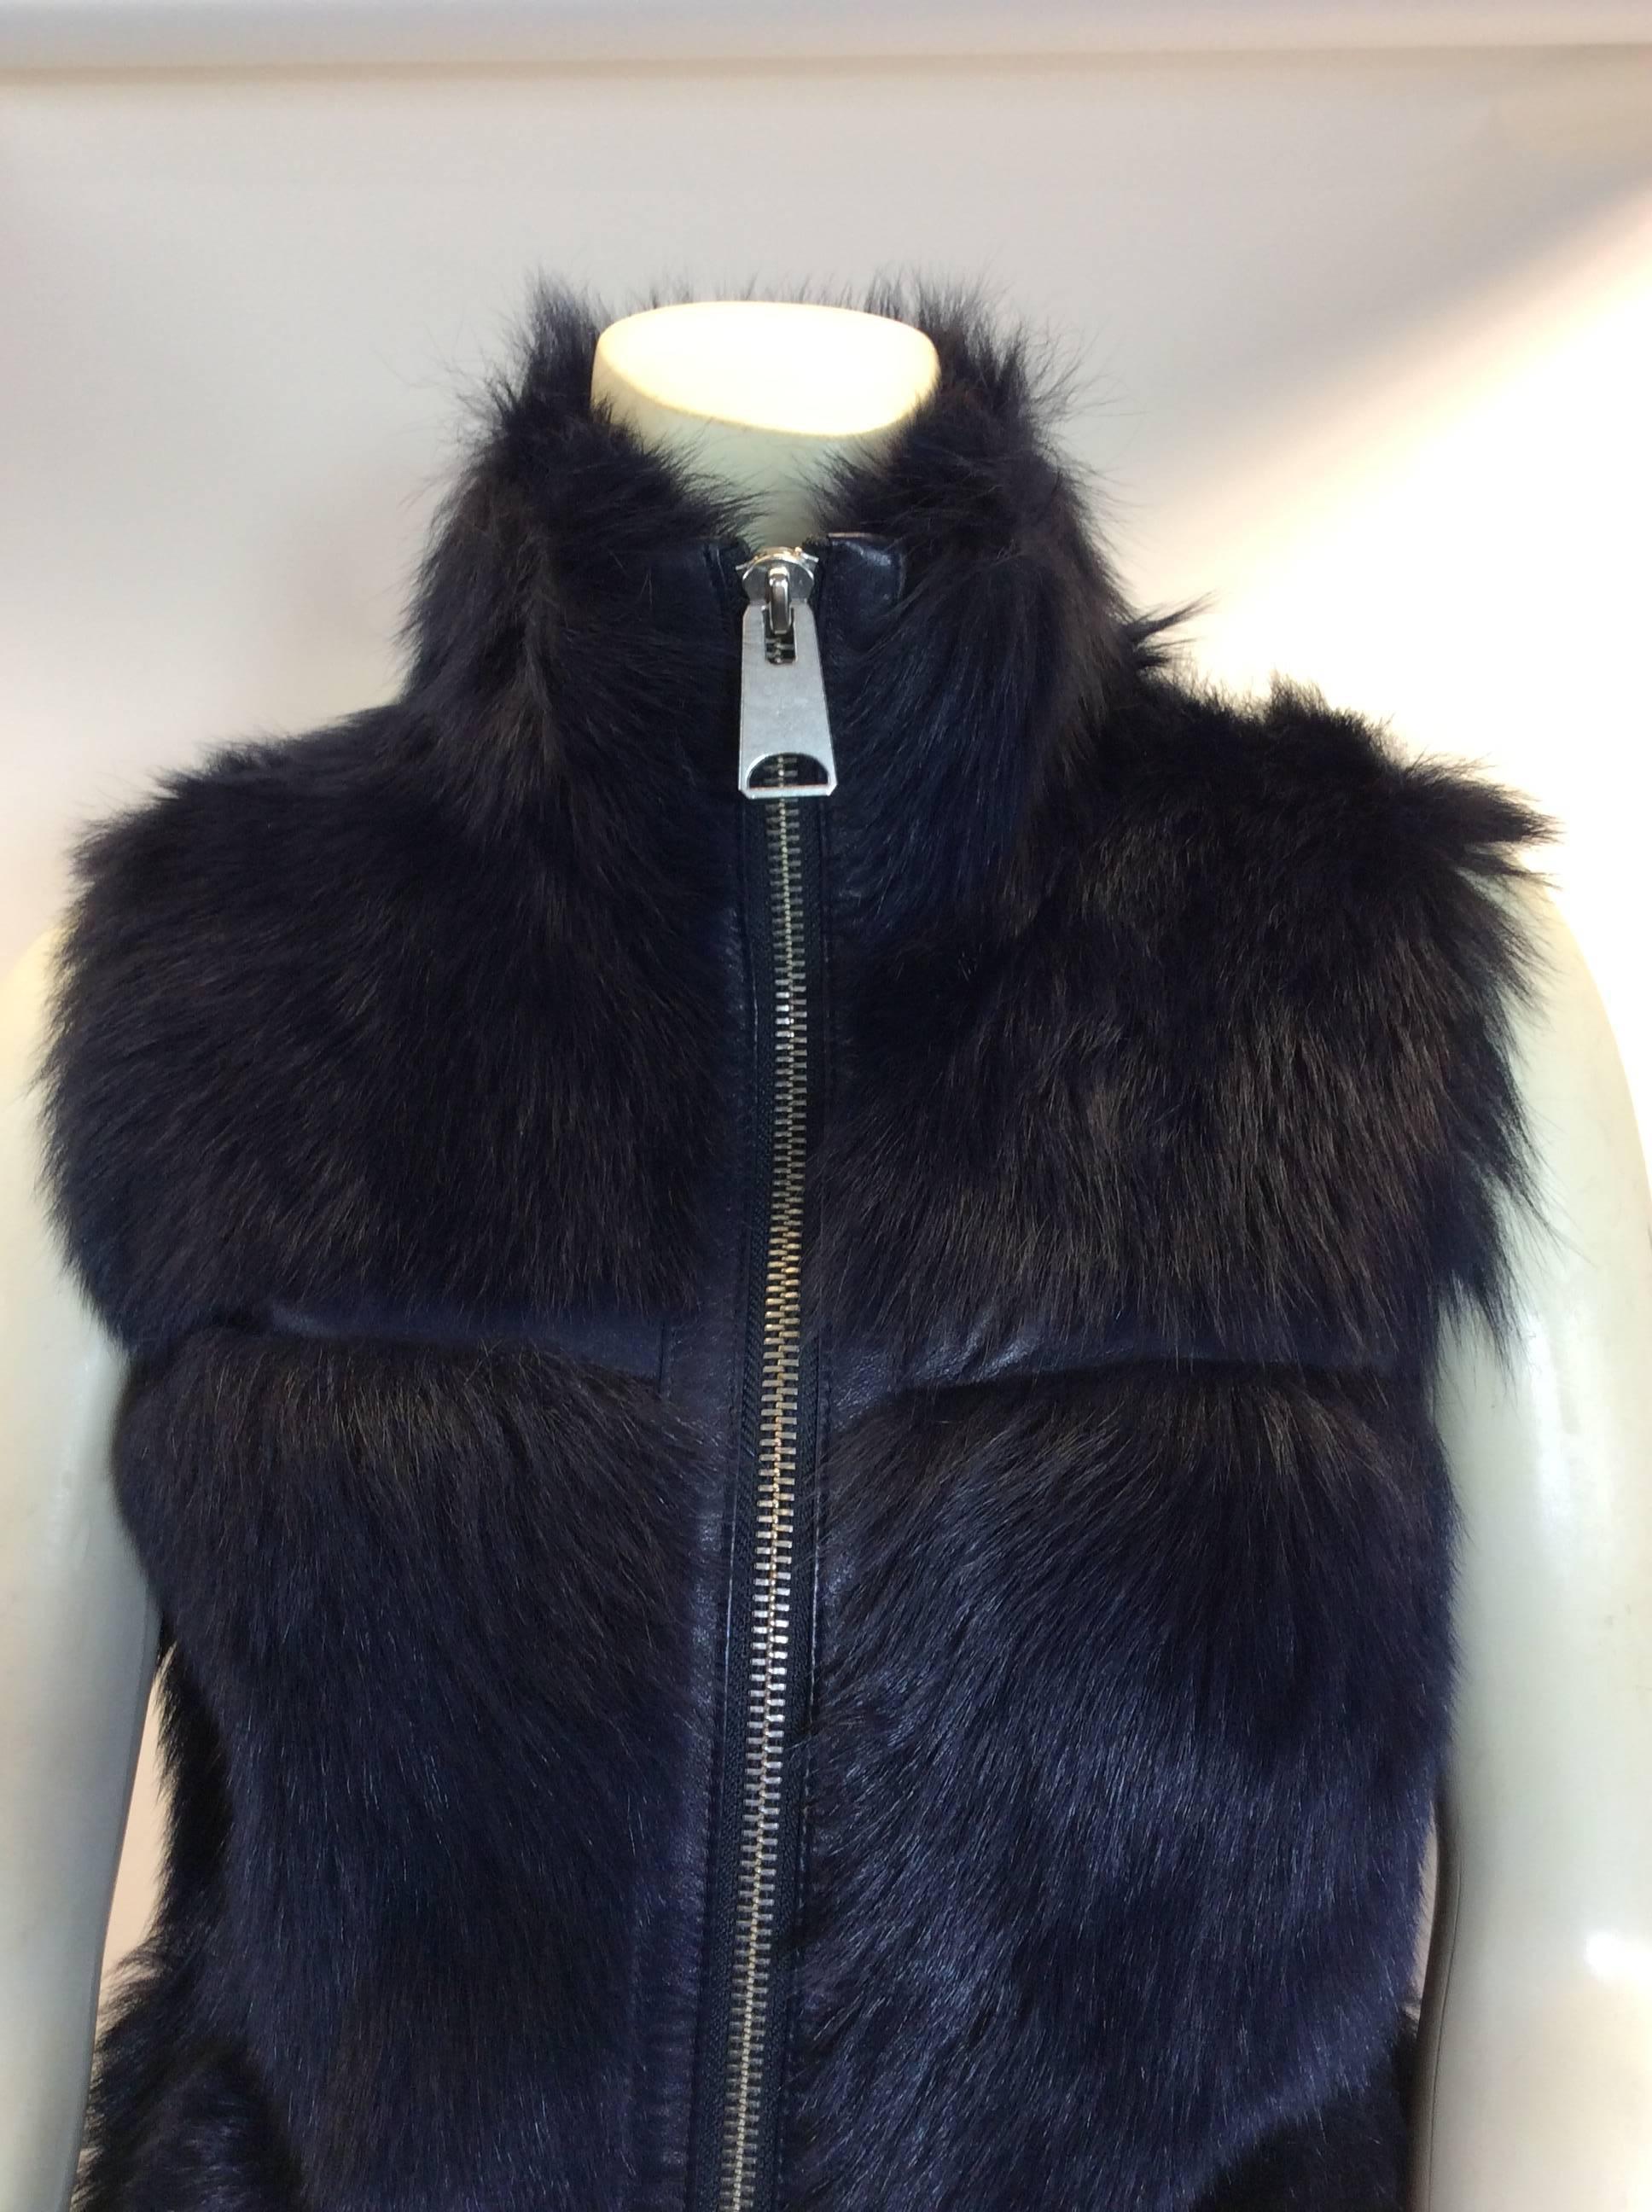 Via Veneto Navy Shearling And Leather Vest
$750
Long haired shearling and 100% lambskin leather
Made in Turkey 
Size XS
Zip up style